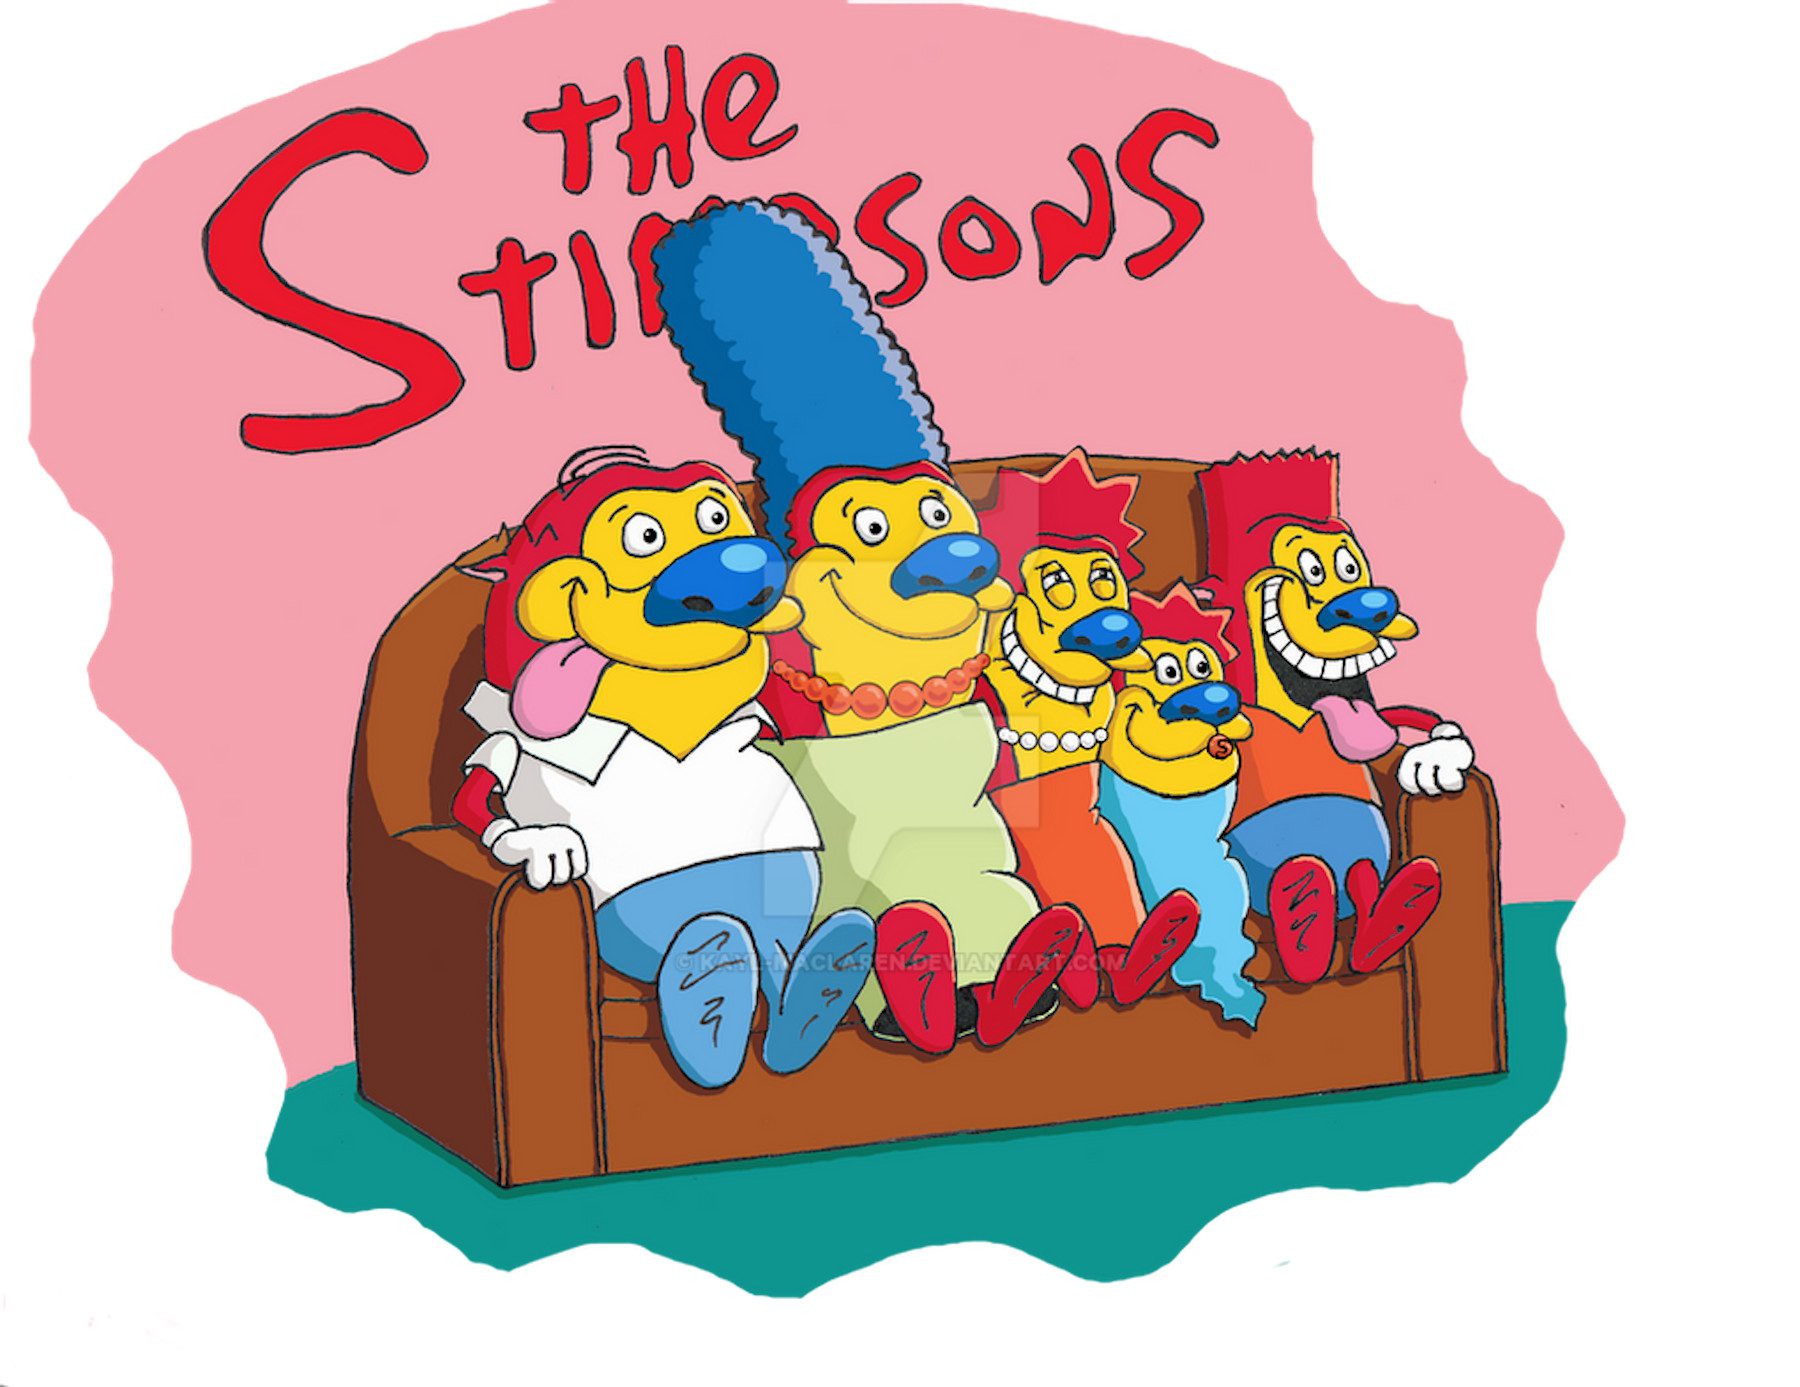 The Simpsons couch gag with characters stylized as Stimpy from the Ren and Stimpy Show.